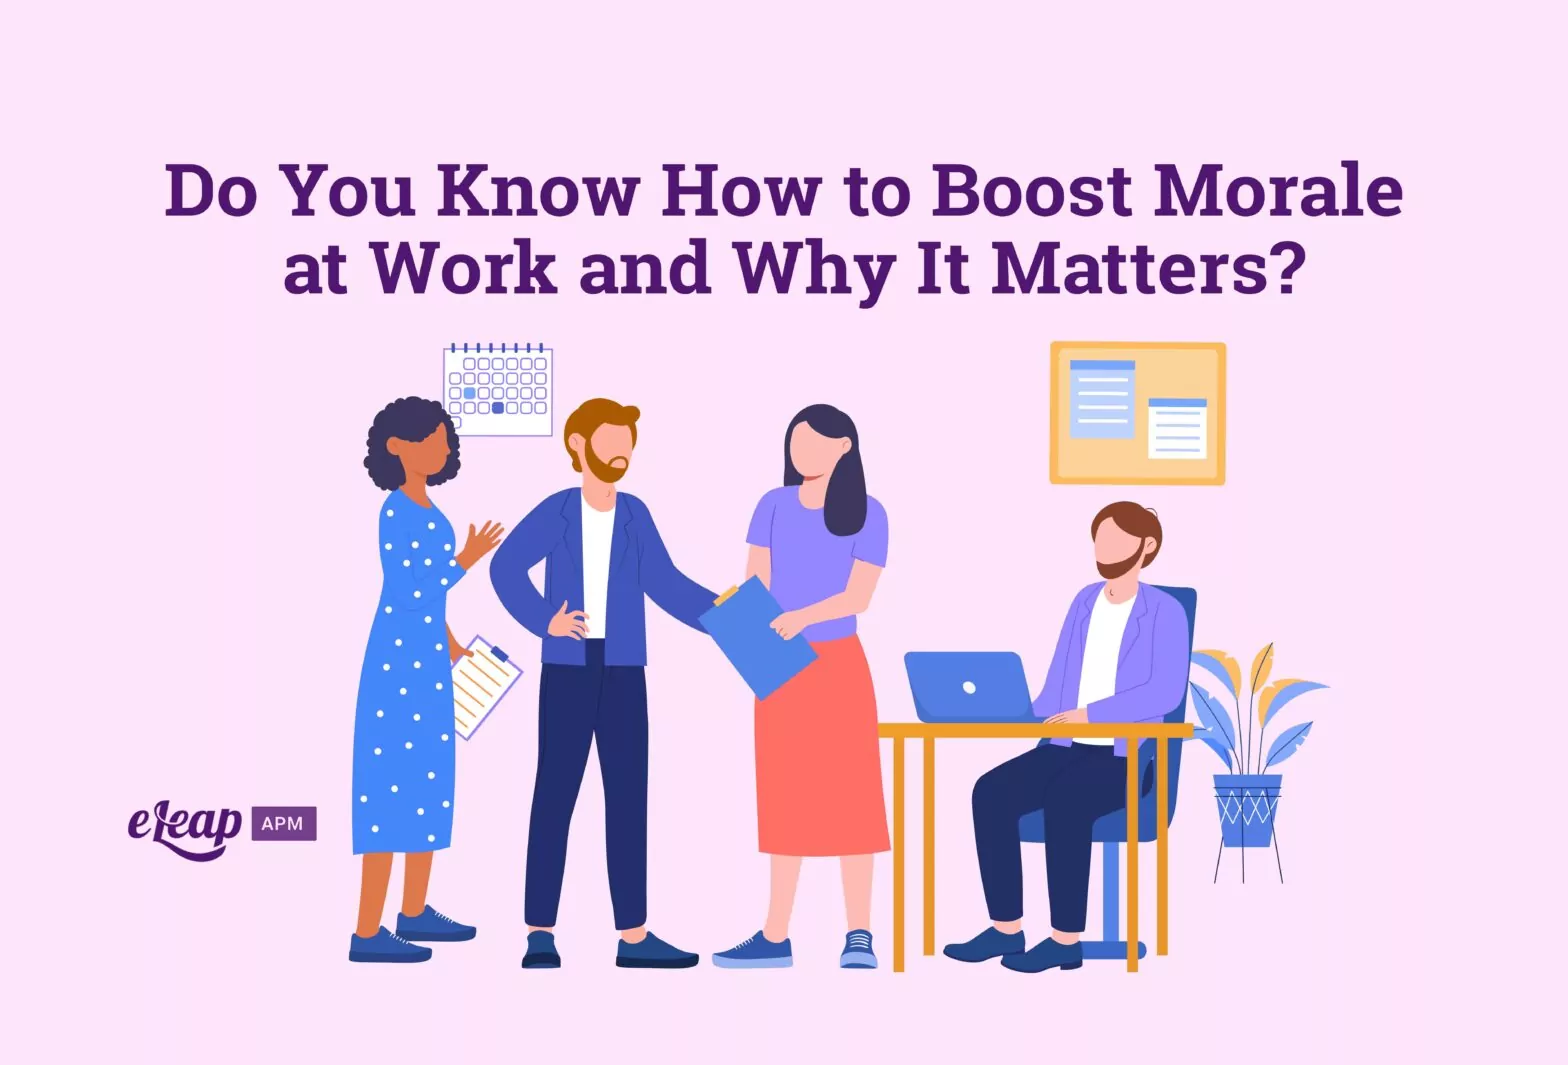 Do You Know How to Boost Morale at Work and Why It Matters?